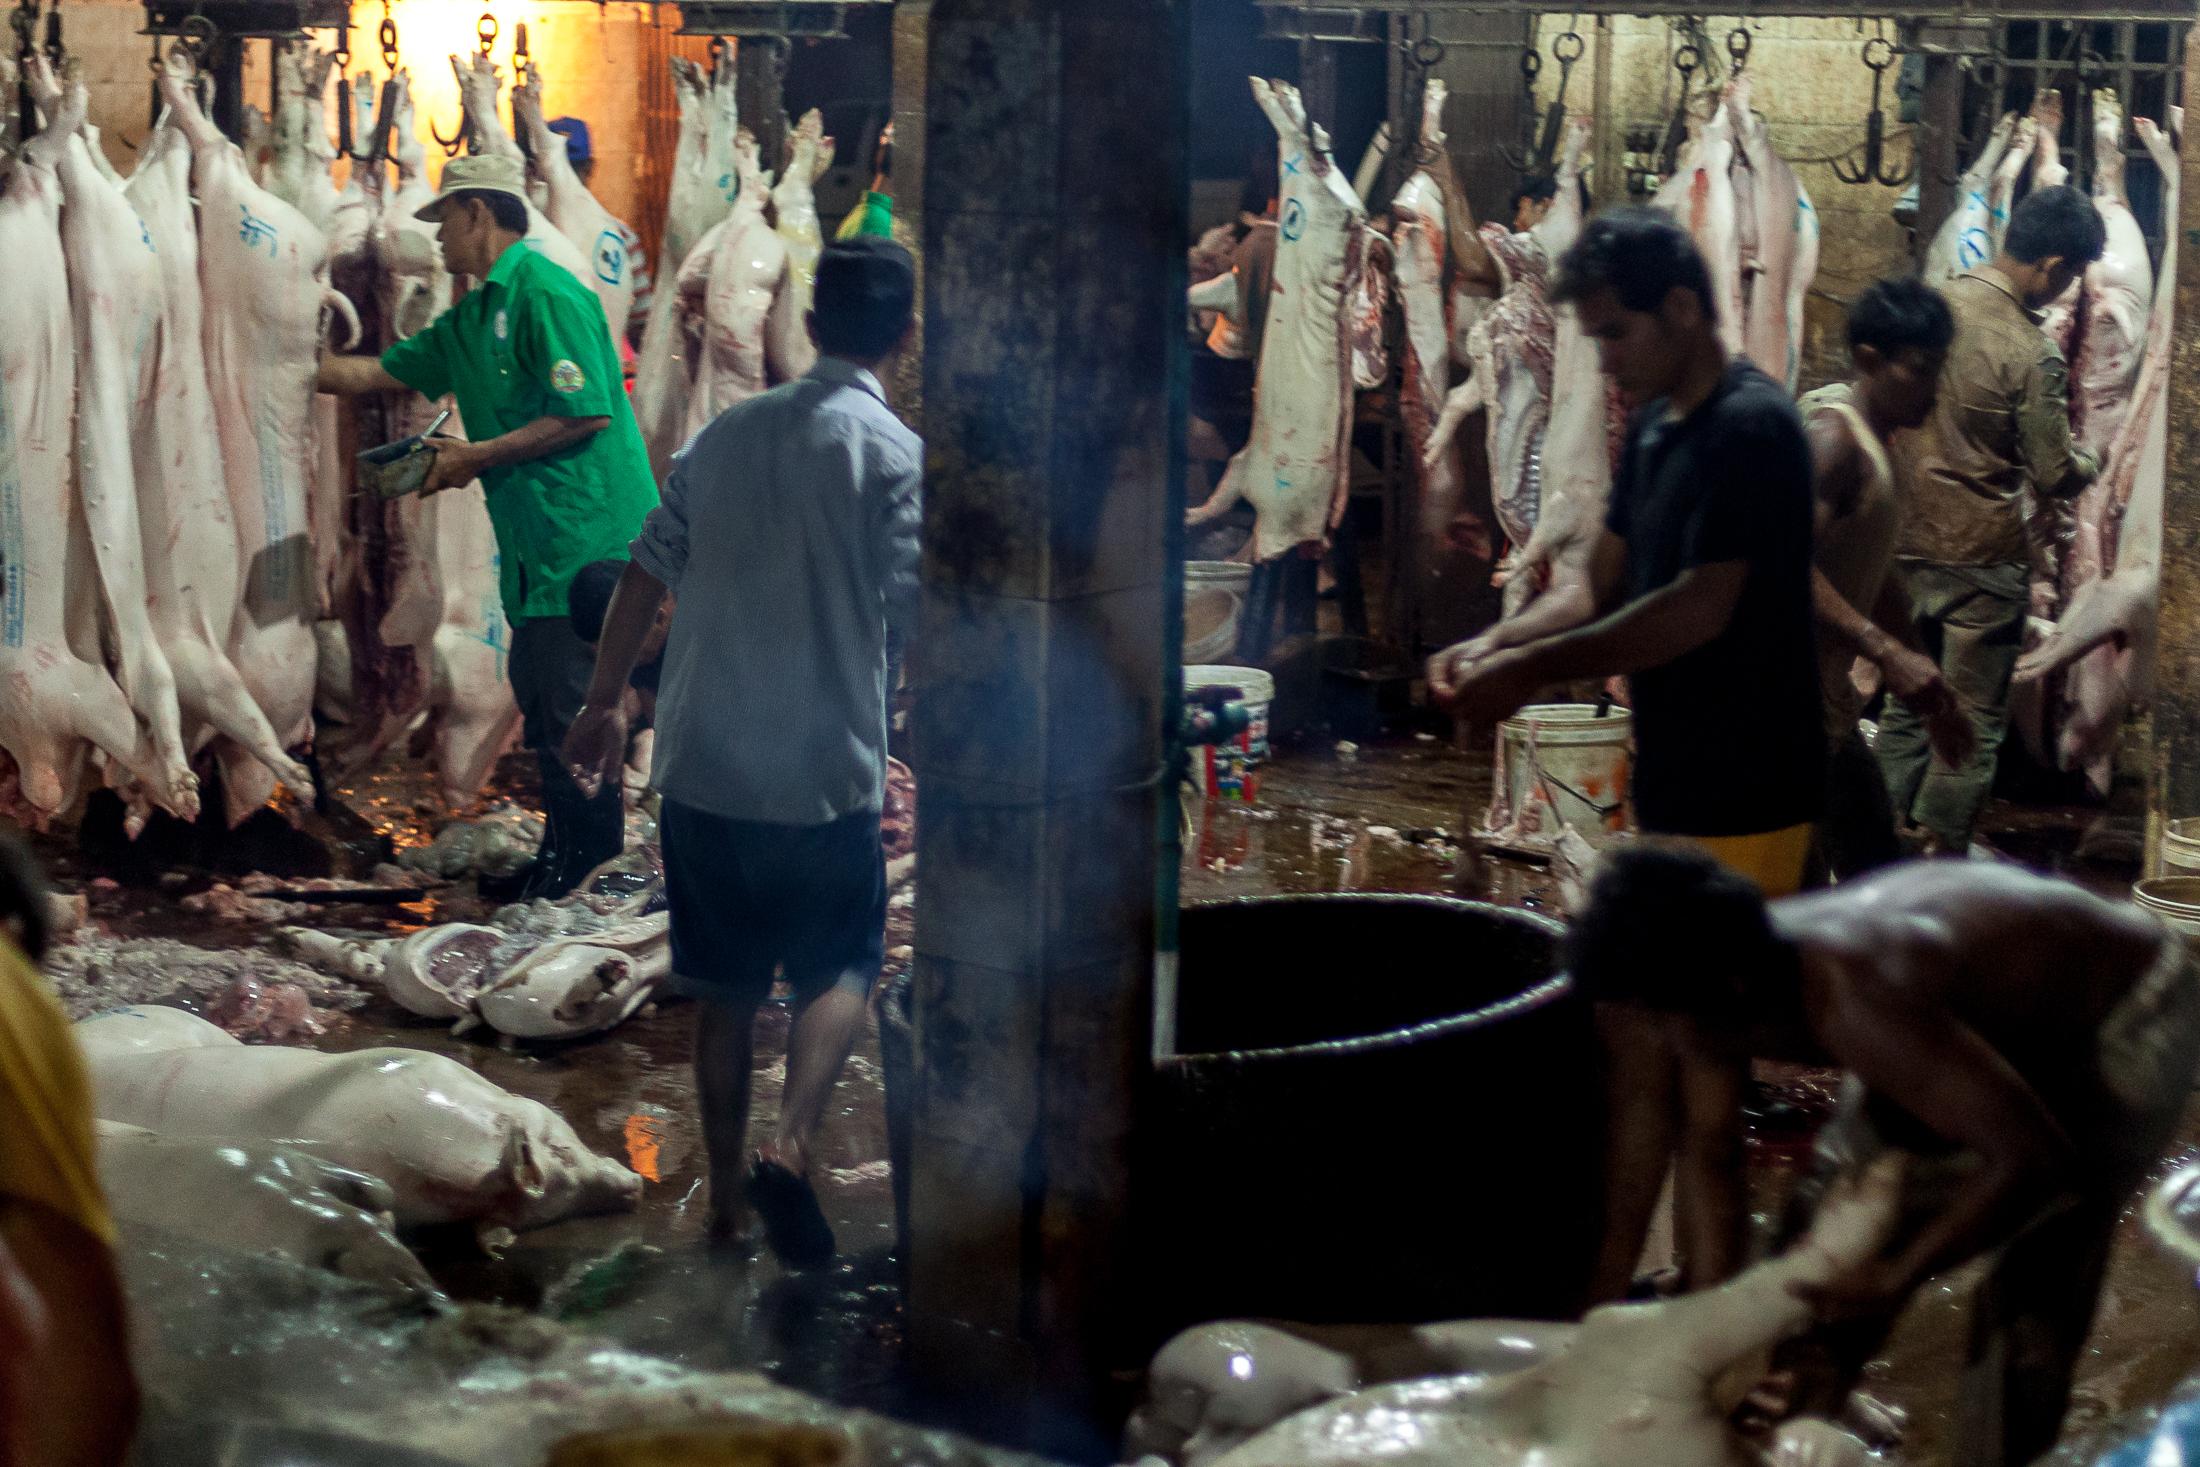 Inside a Cambodian Slaughterhouse - SIEM REAP, CAMBODIA - FEBRUARY 22: A group of workers...